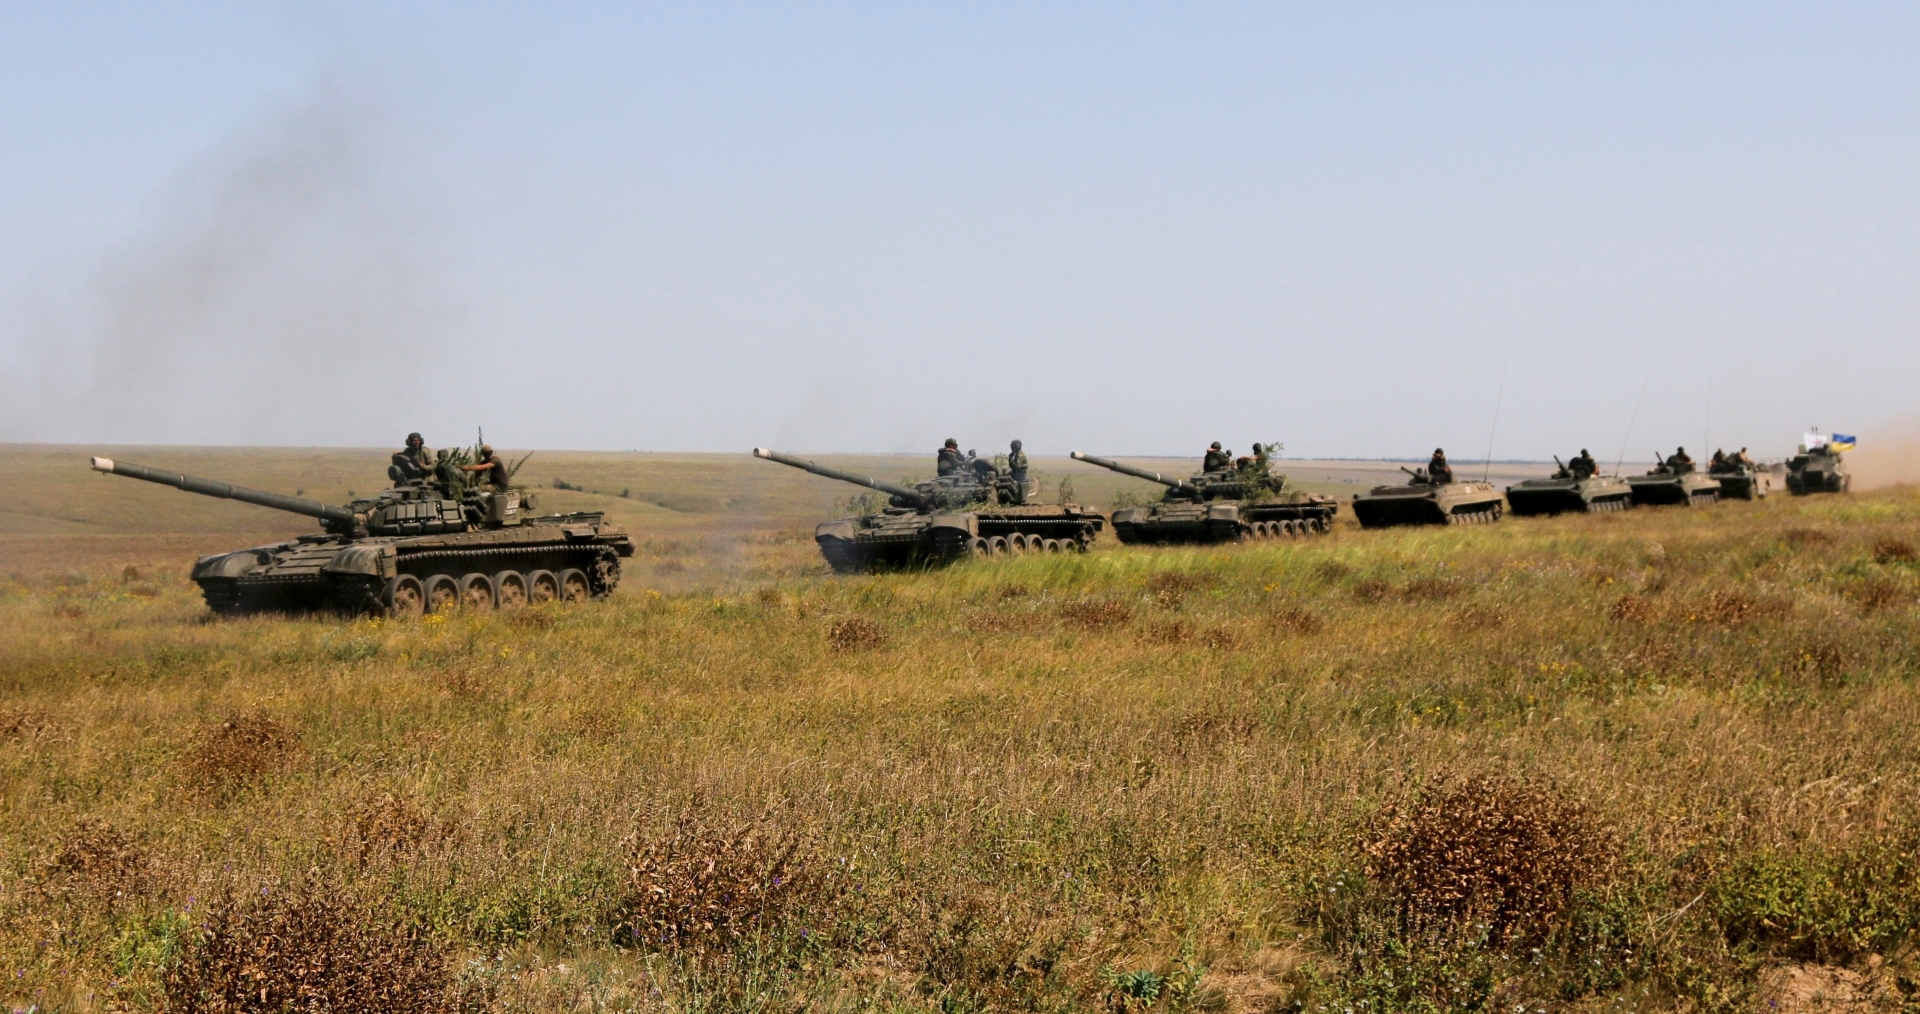 A column of Ukrainian tanks and APCs move towards the de-facto border with Crimea near Kherson, southern Ukraine, Friday, Aug. 12, 2016. Ukraine put its troops on combat alert Thursday along the country's de-facto borders with Crimea and separatist rebels in the east amid an escalating war of words with Russia over Crimea. (AP Photo/Aleksandr Shulman) Ukraine Russia